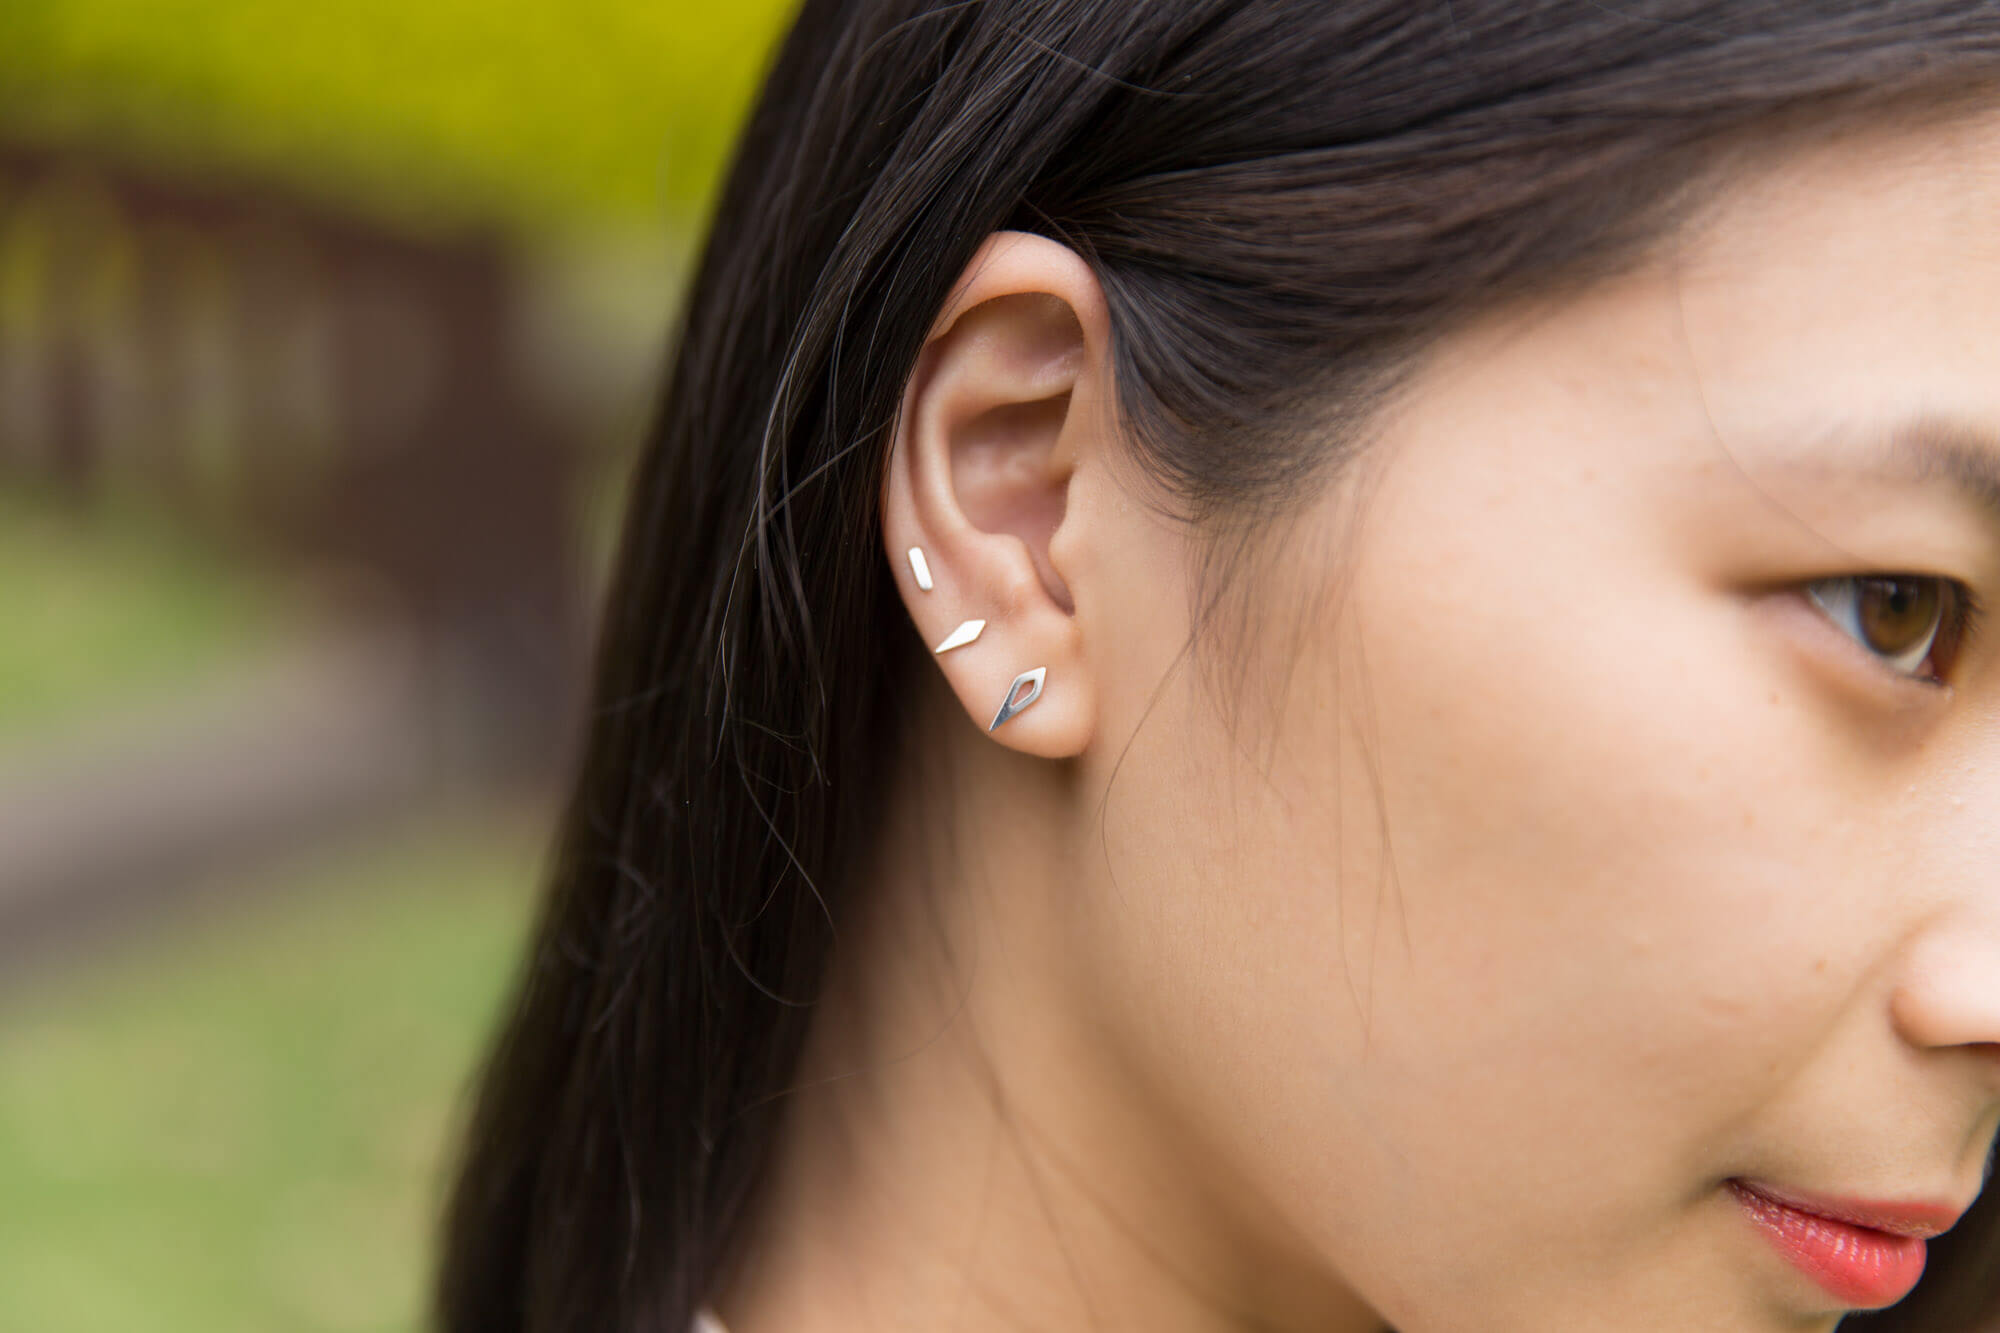 A closeup of the side of a woman’s face with the focus on three small silver earrings on her earlobe